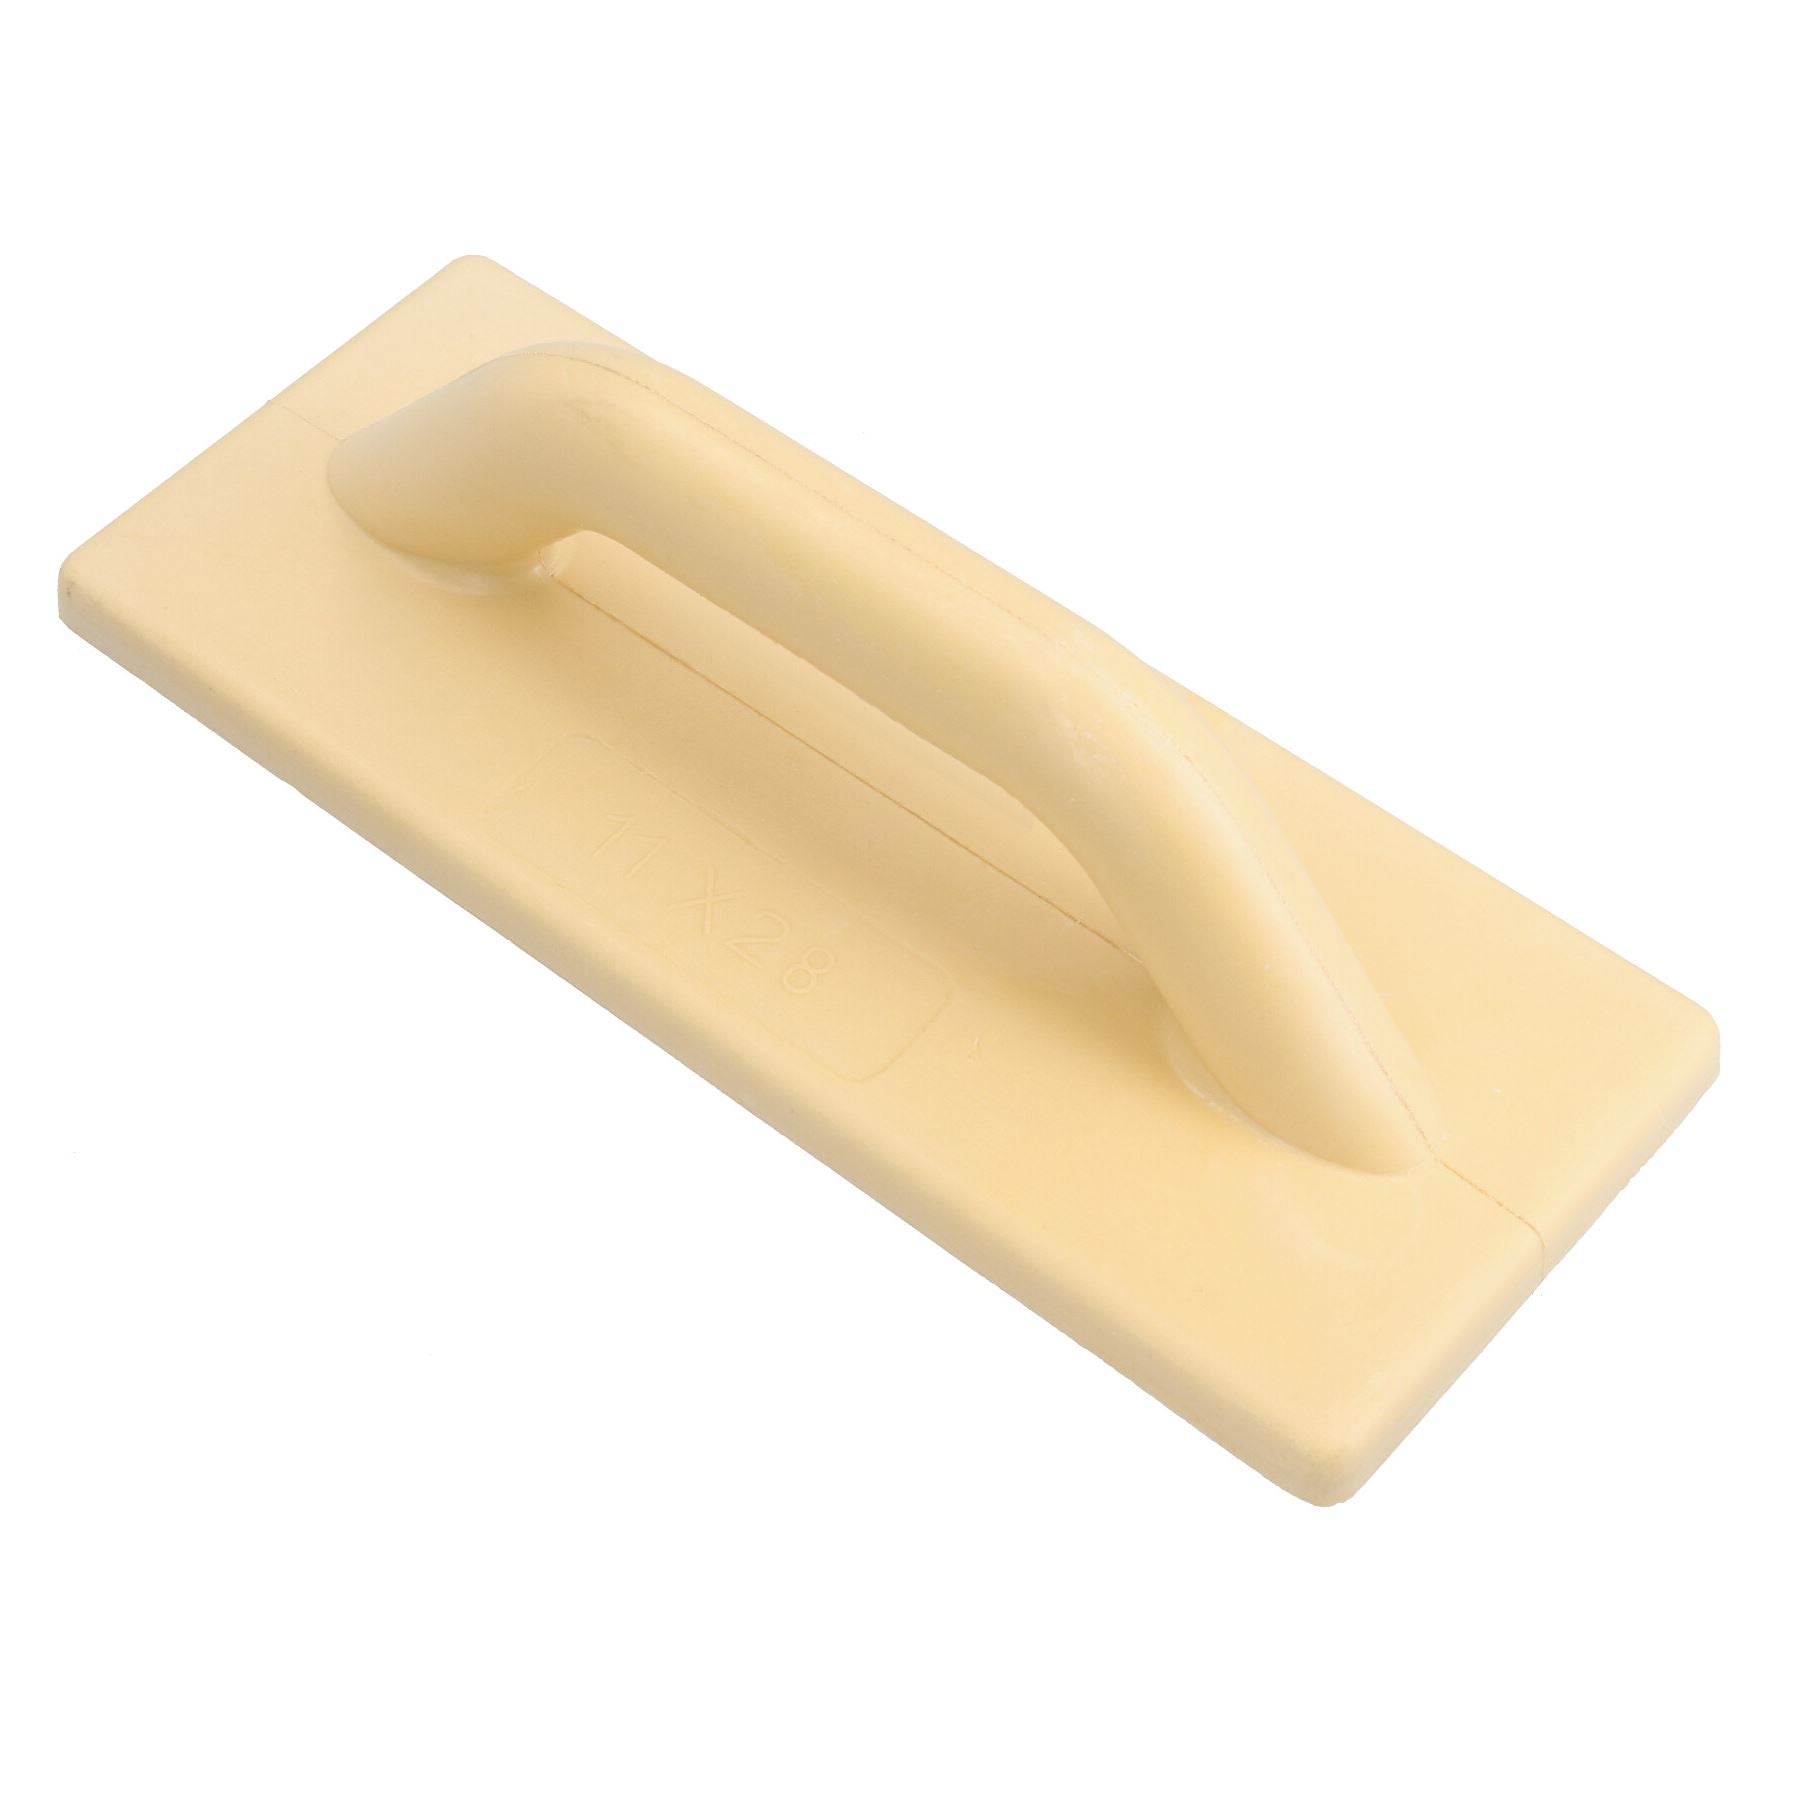 Plasterers Poly Plastering Float 280mm x 110mm Smooth Plaster Or Cement TE581